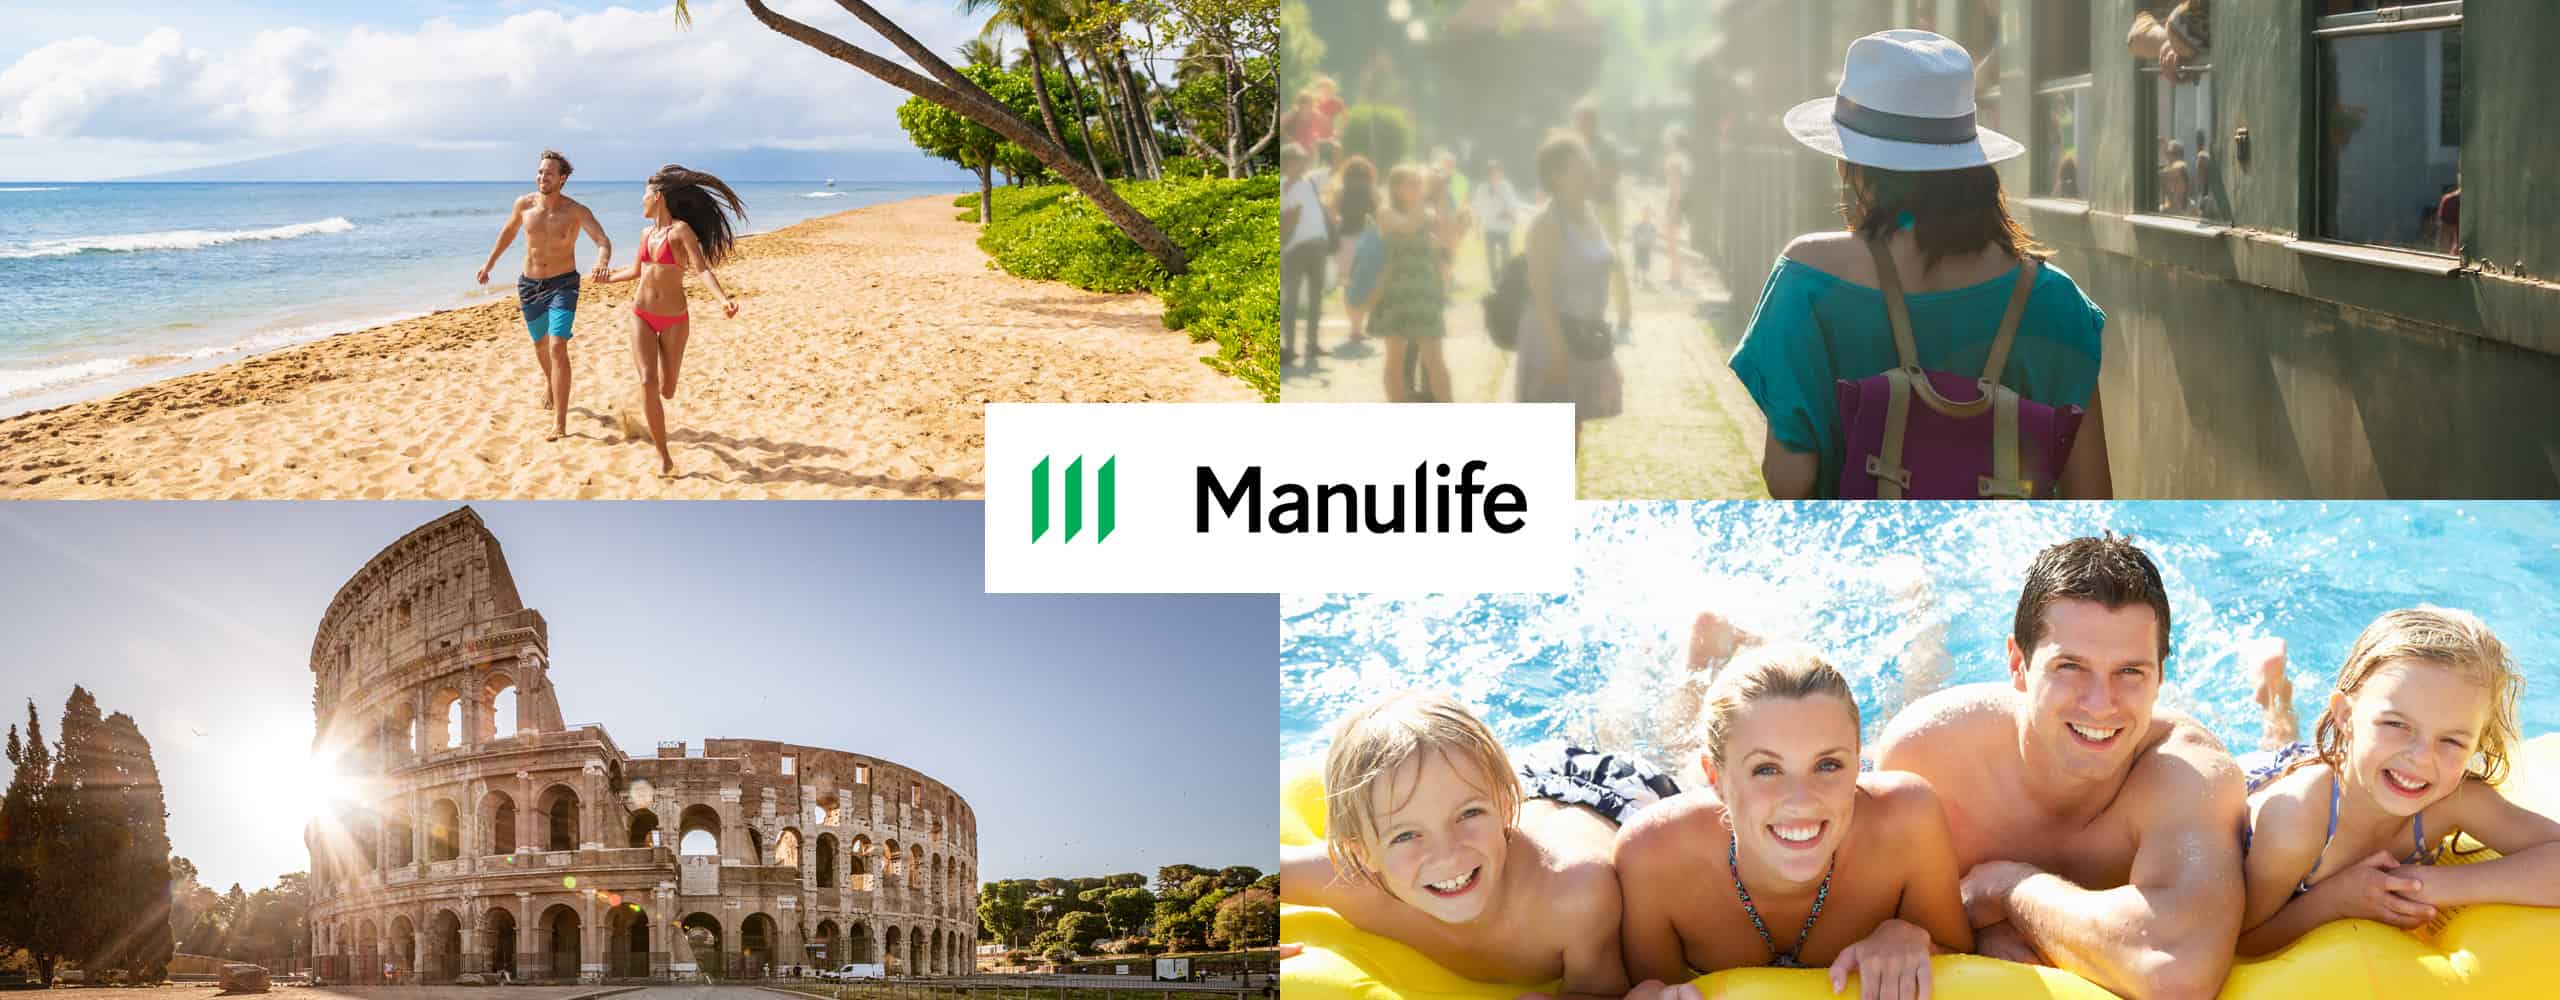 single trip all inclusive manulife